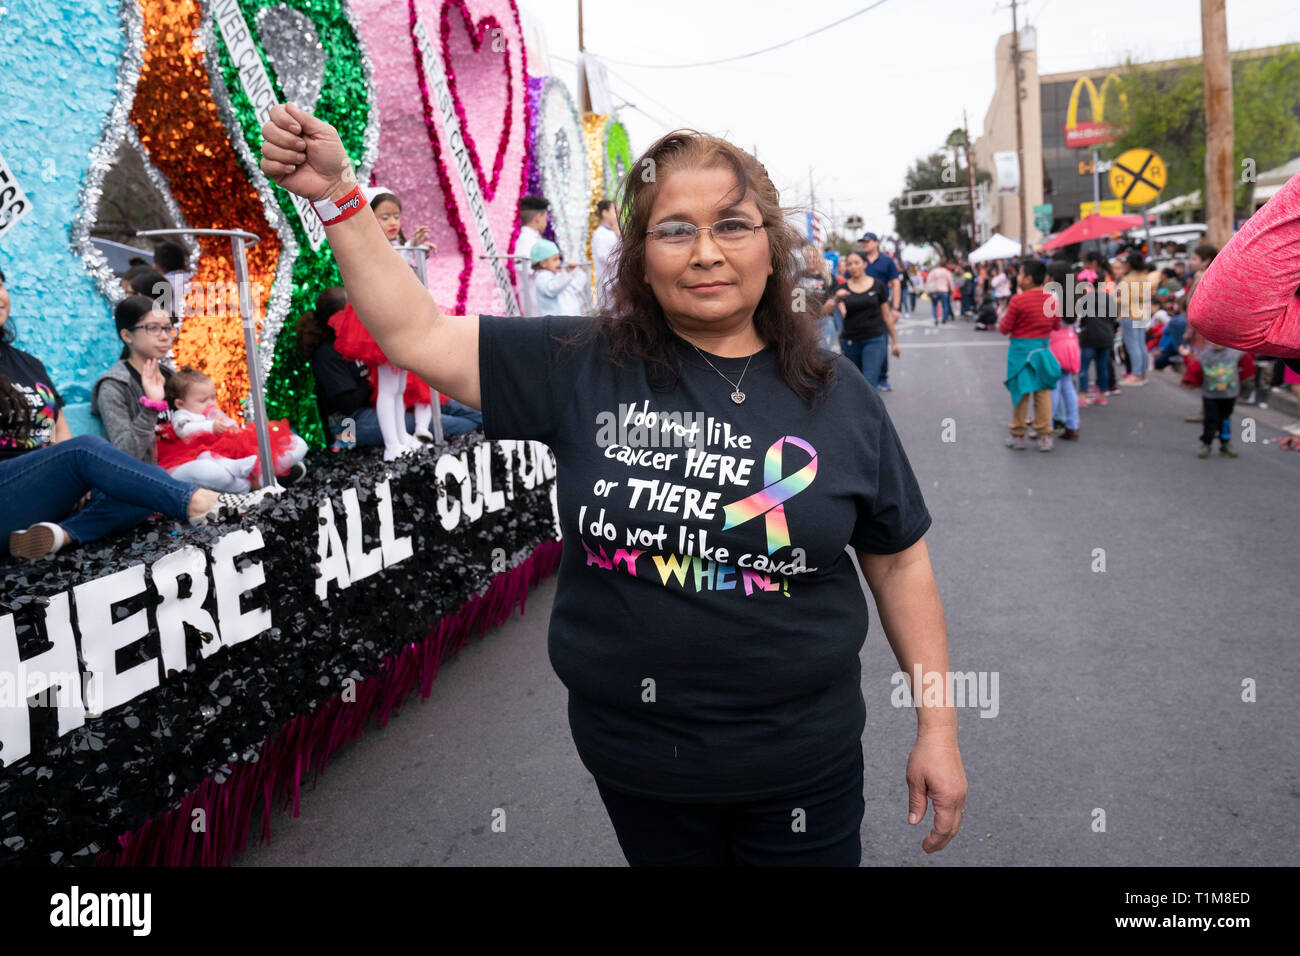 Hispanic woman wears cancer-awareness tee shirt based on lines from Dr. Seuss children's book 'Green Eggs and Ham' at parade in downtown Laredo, Texas. Stock Photo